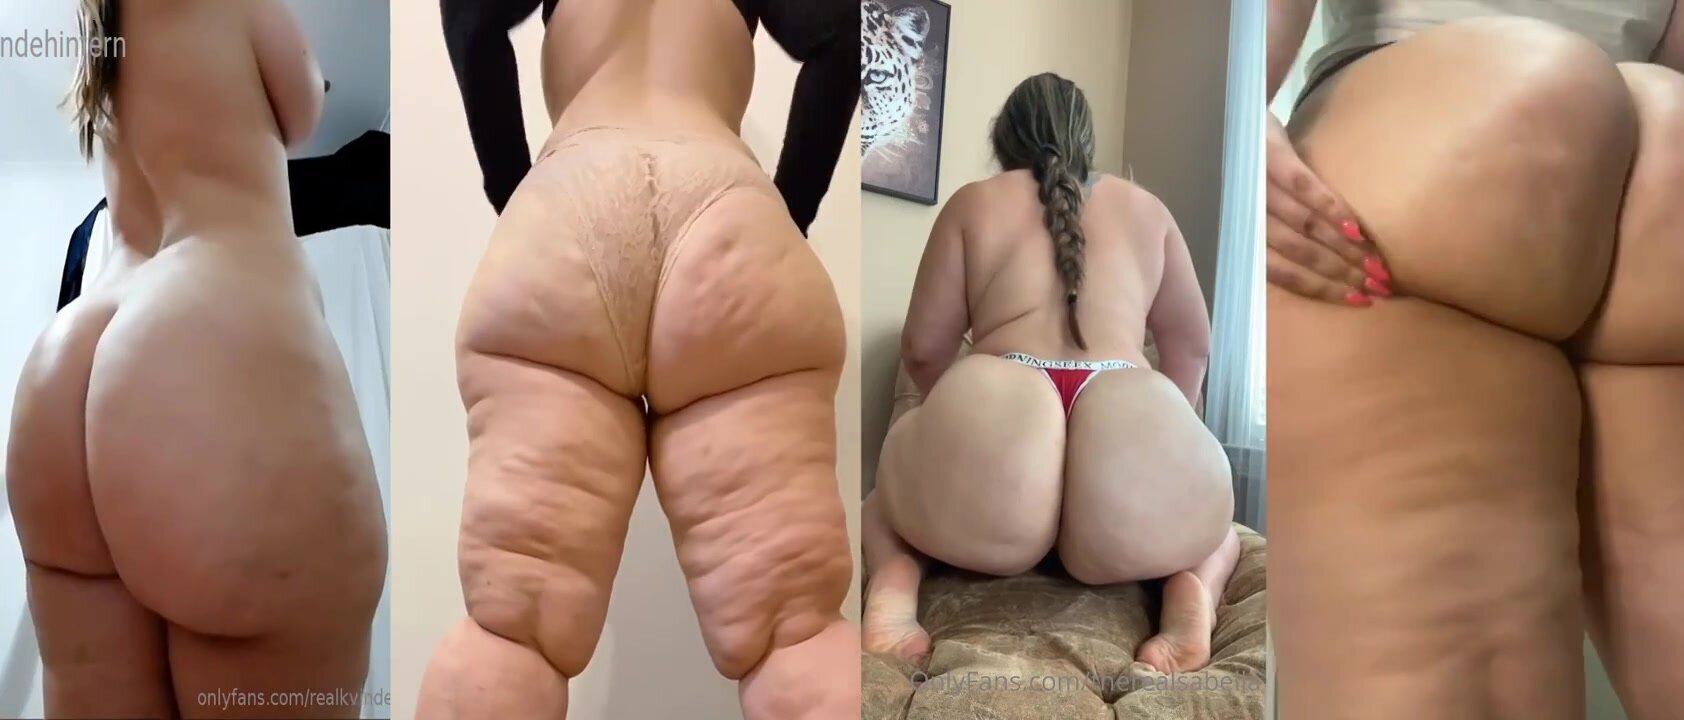 4 side by side PAWG BBW compilation